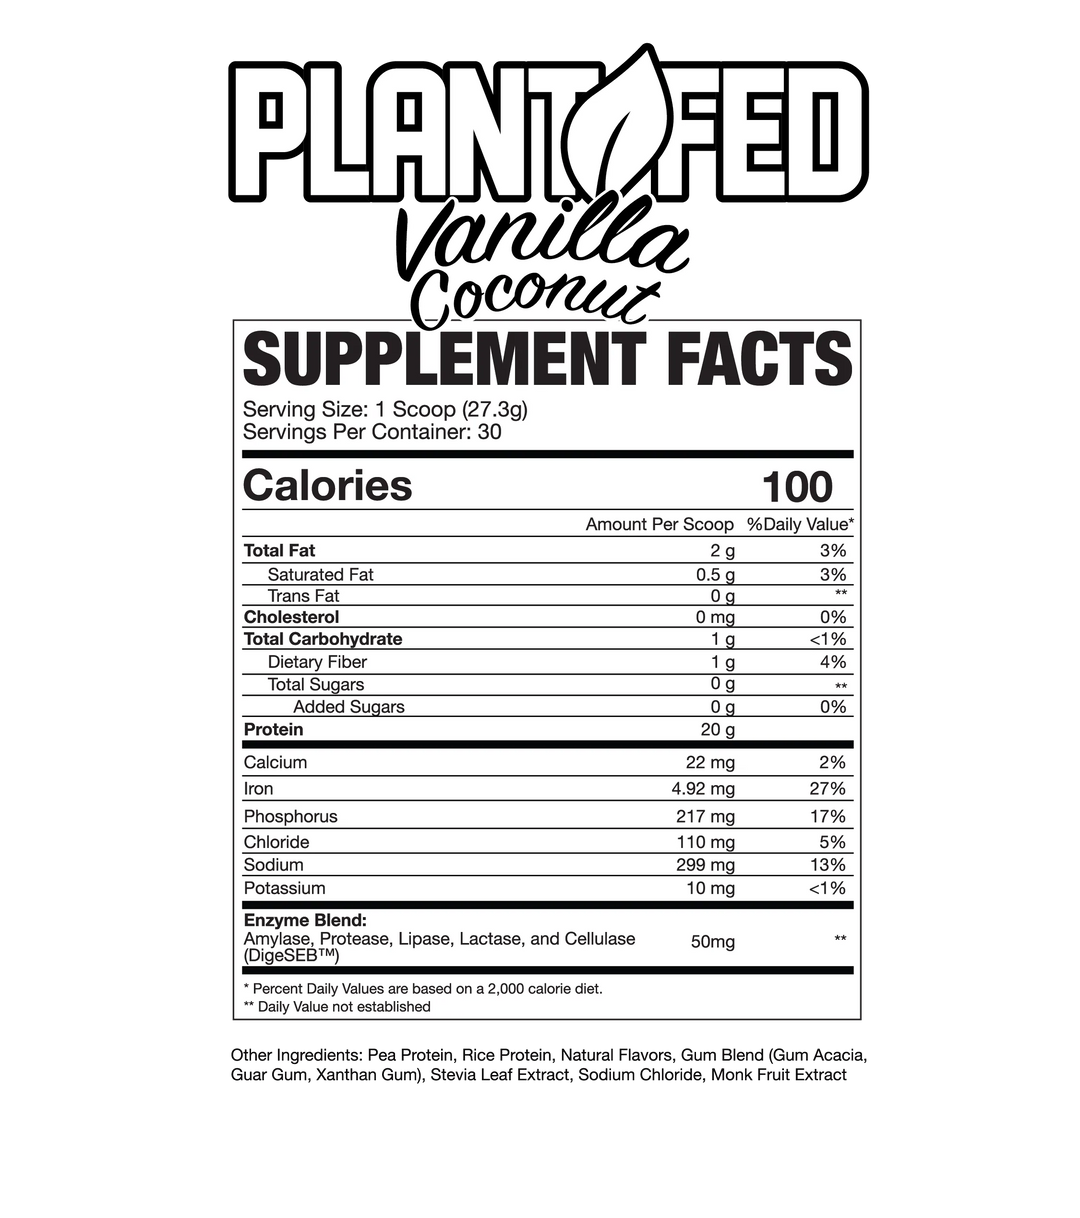 AXE & SLEDGE Plant Fed // All-Natural Vegan Protein